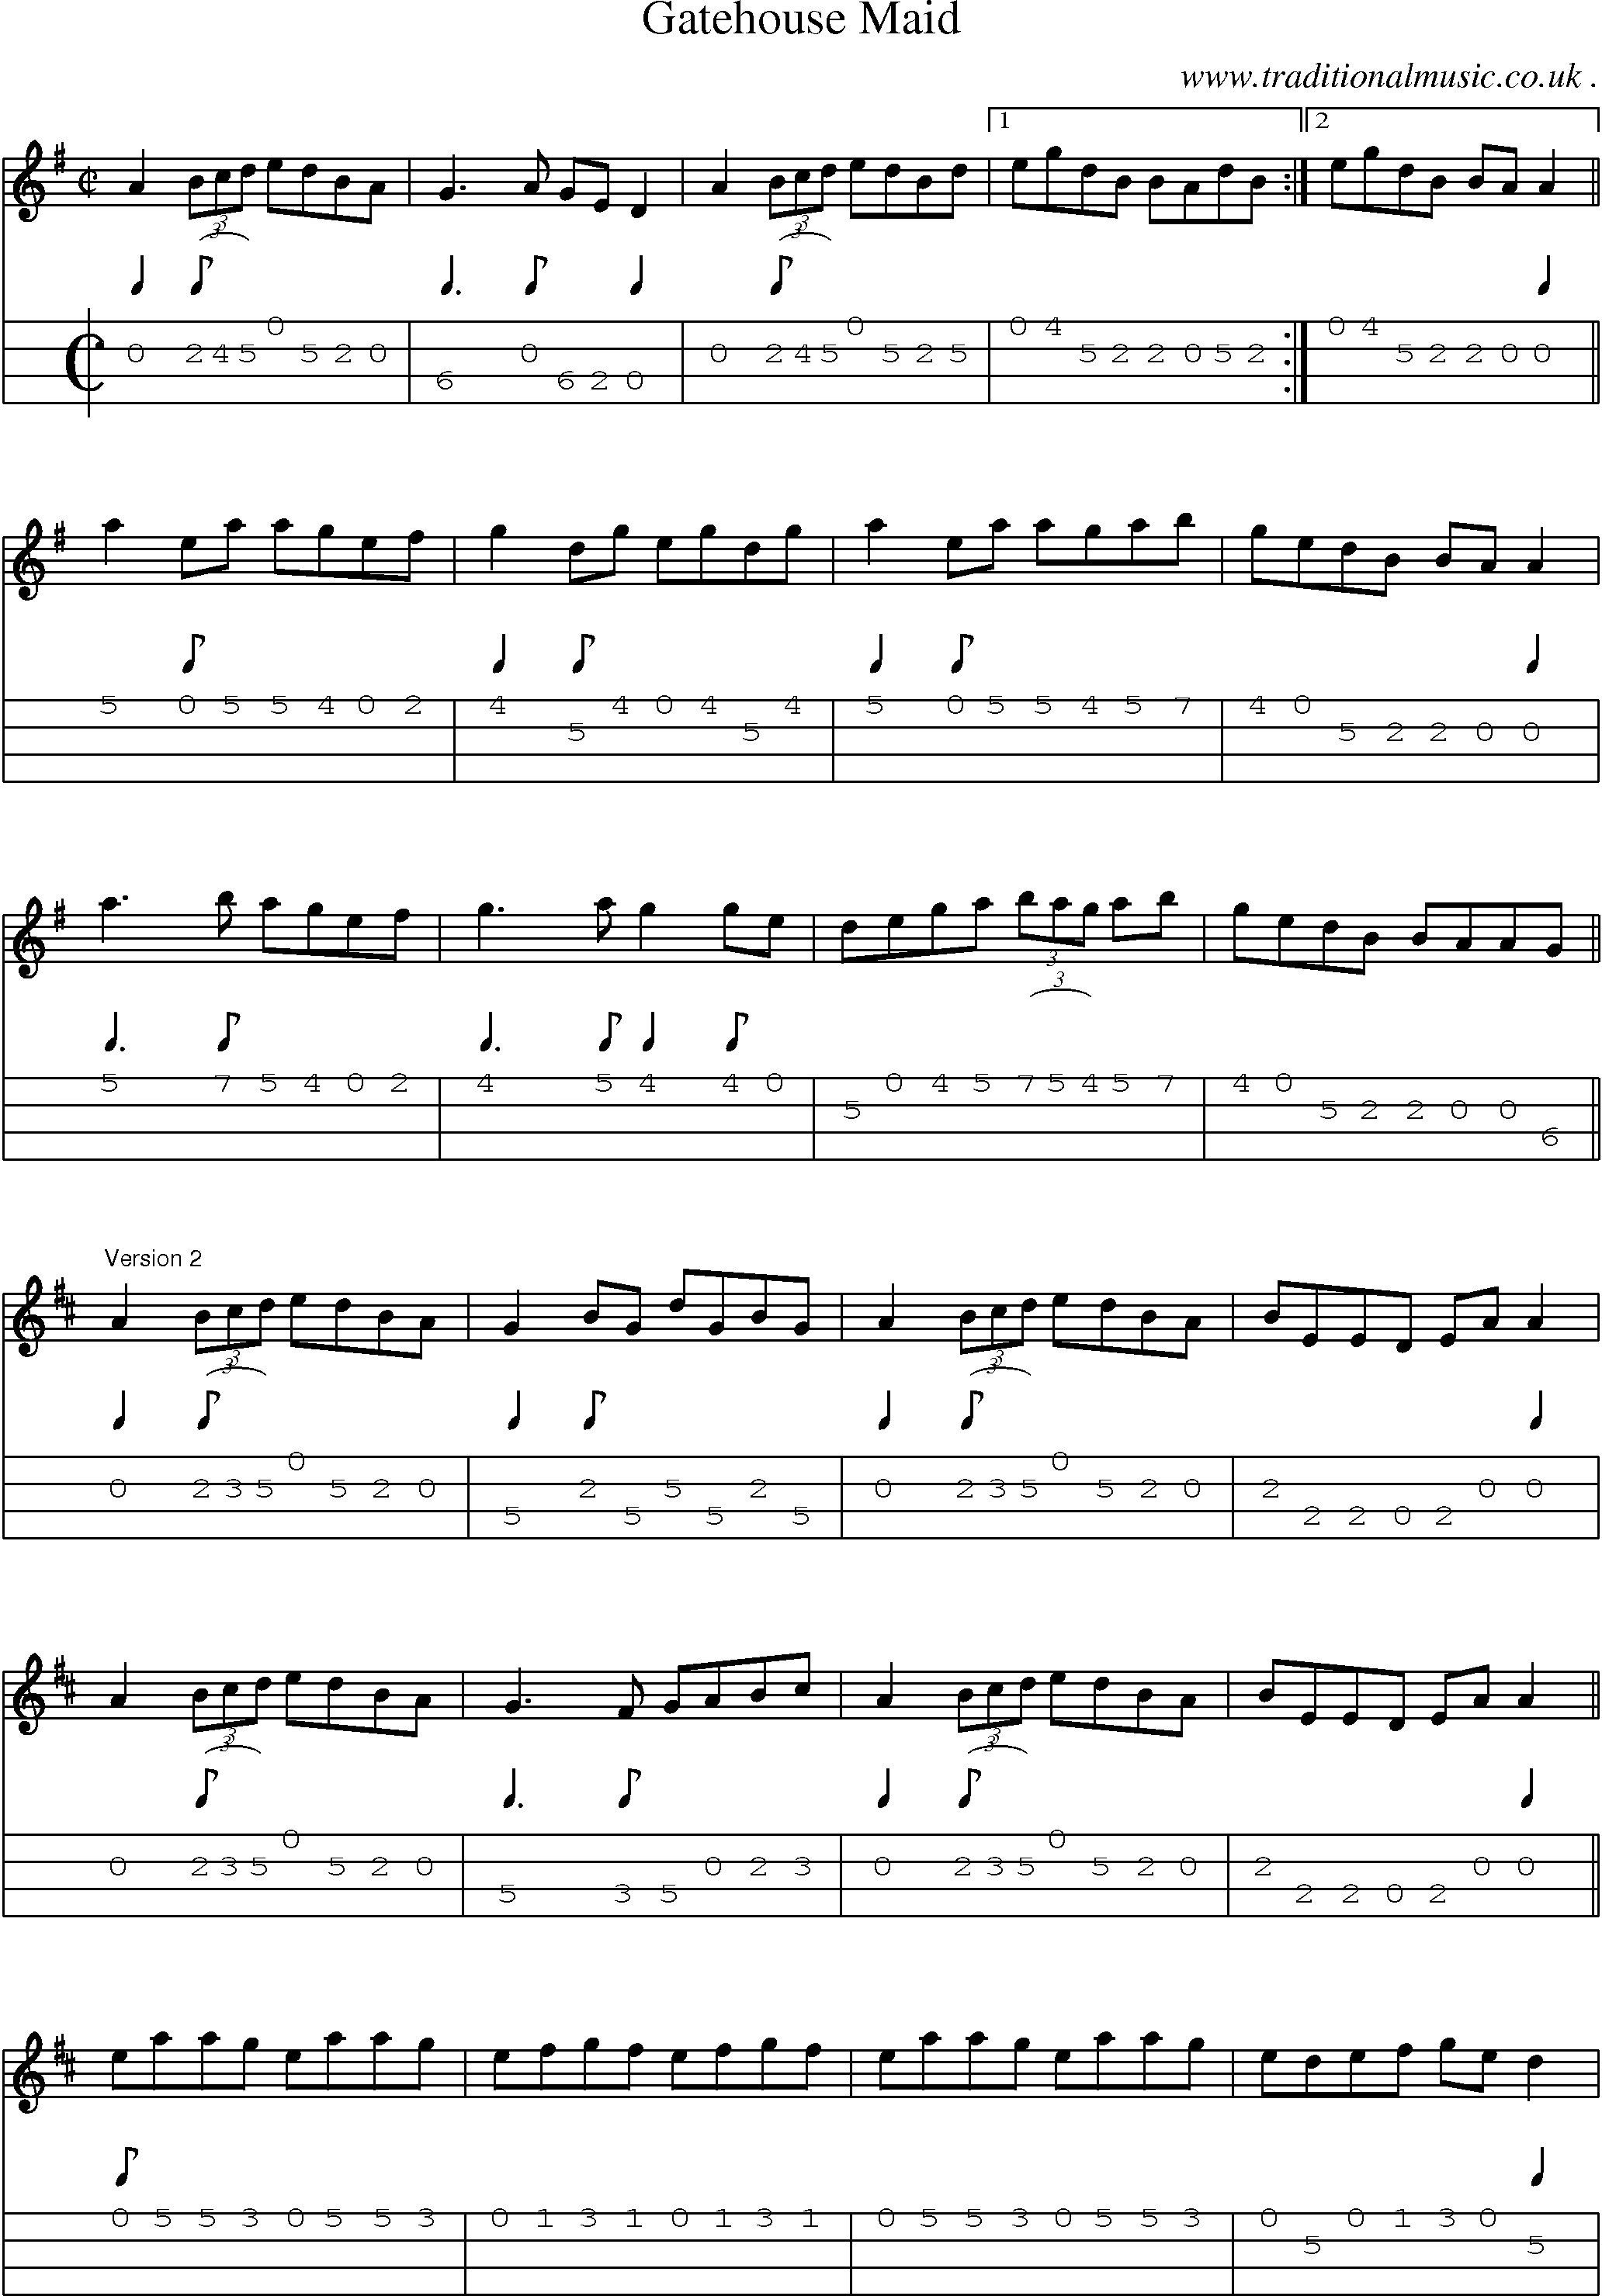 Sheet-Music and Mandolin Tabs for Gatehouse Maid